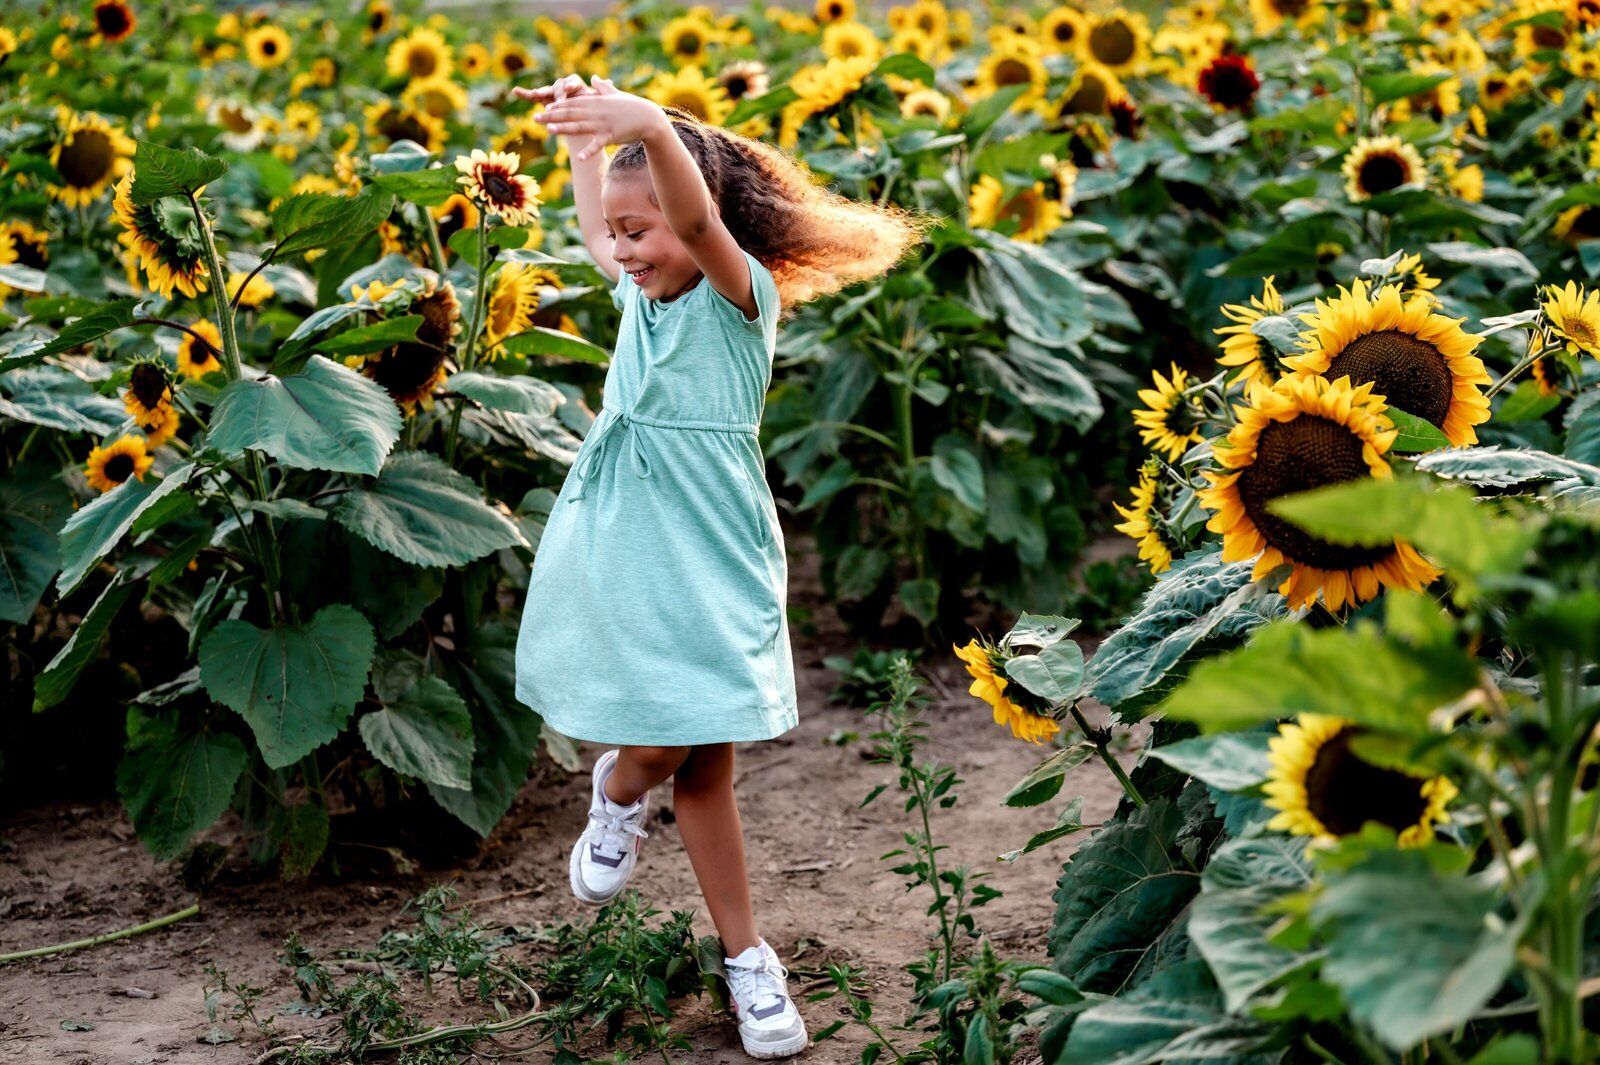 Child dancing in sunflowers